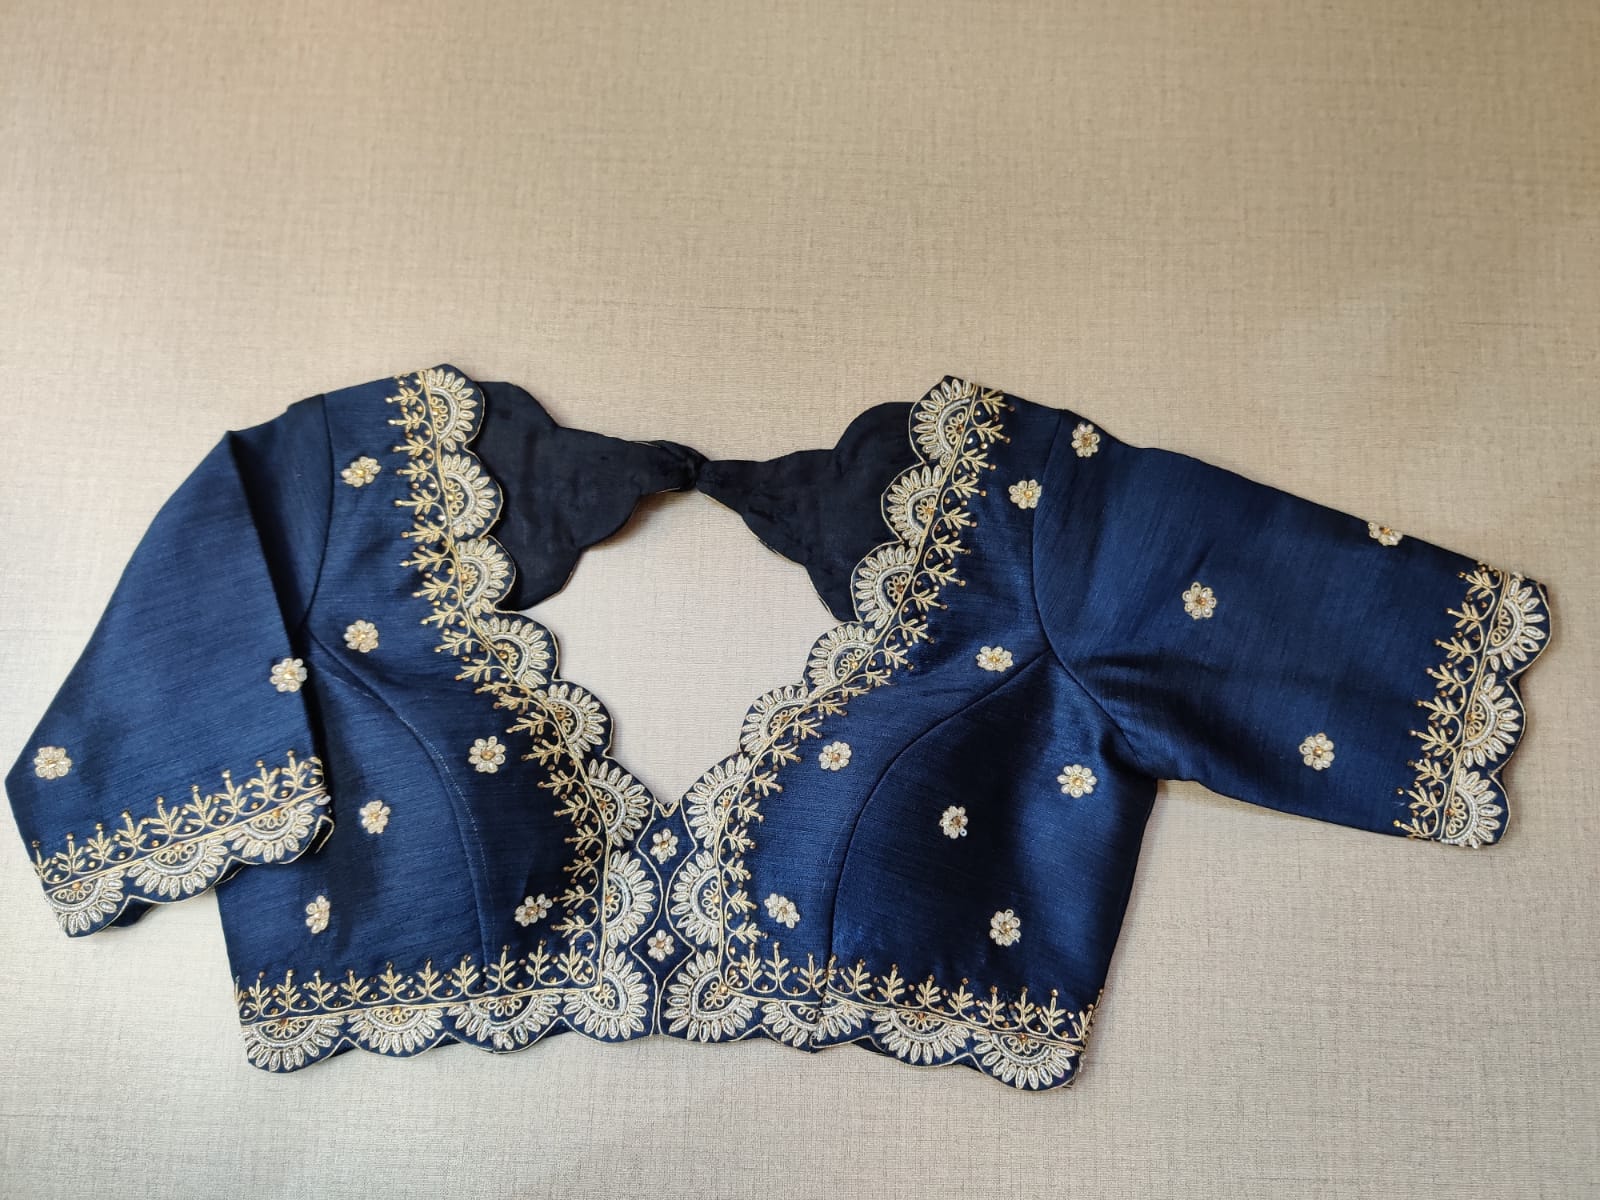 Buy beautiful dark blue embroidered saree blouse online in USA. Elevate your Indian ethnic saree looks with beautiful readymade saree blouse, embroidered saree blouses, Banarasi saree blouse, designer sari blouses, sleeveless saree blouses from Pure Elegance Indian fashion store in USA.-front